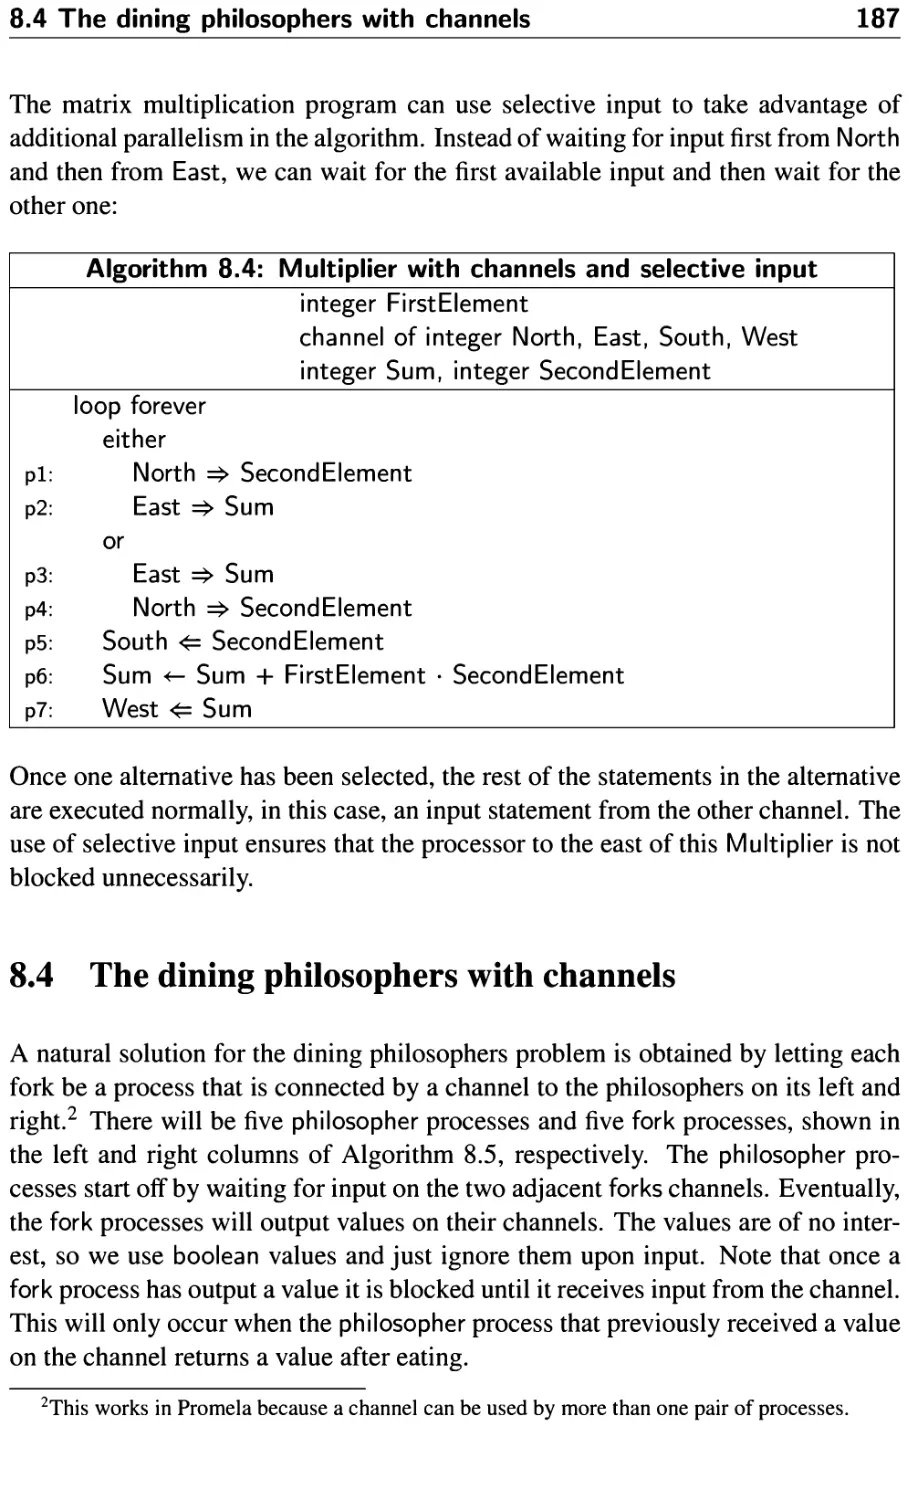 8.4 The dining philosophers with channels